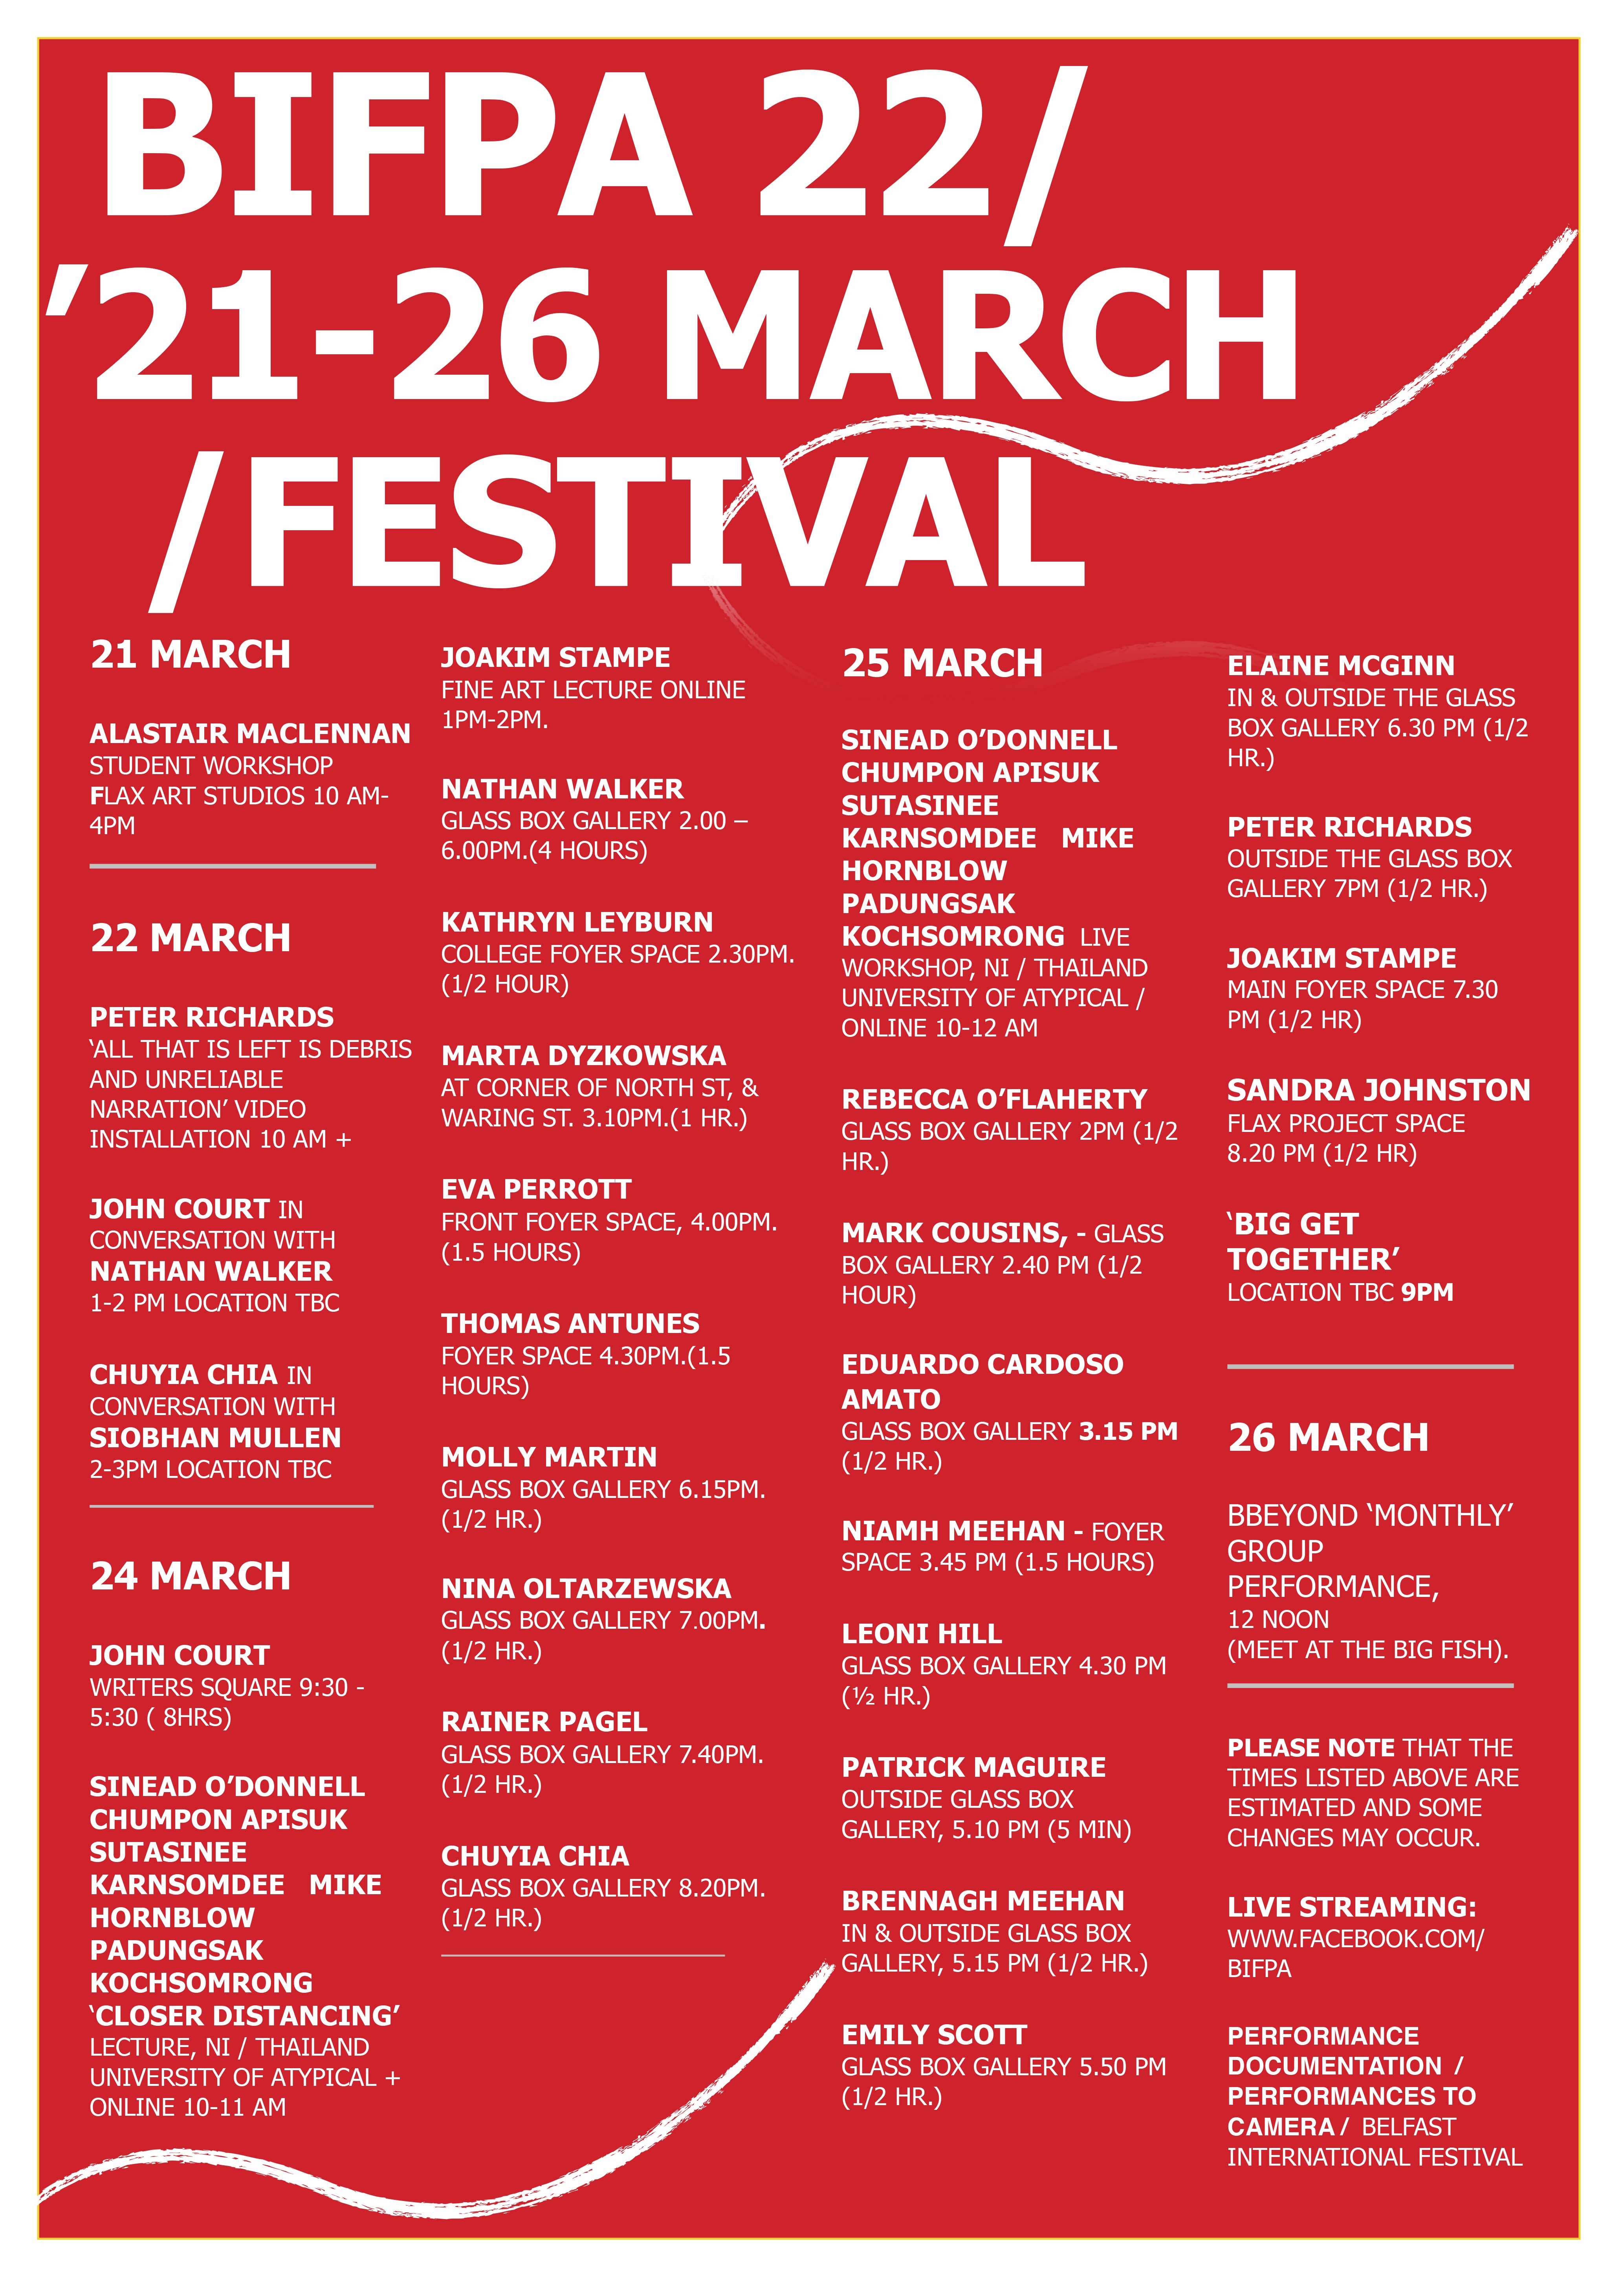 A schedule of performances at the Belfast International Festival of Performance Art 2022